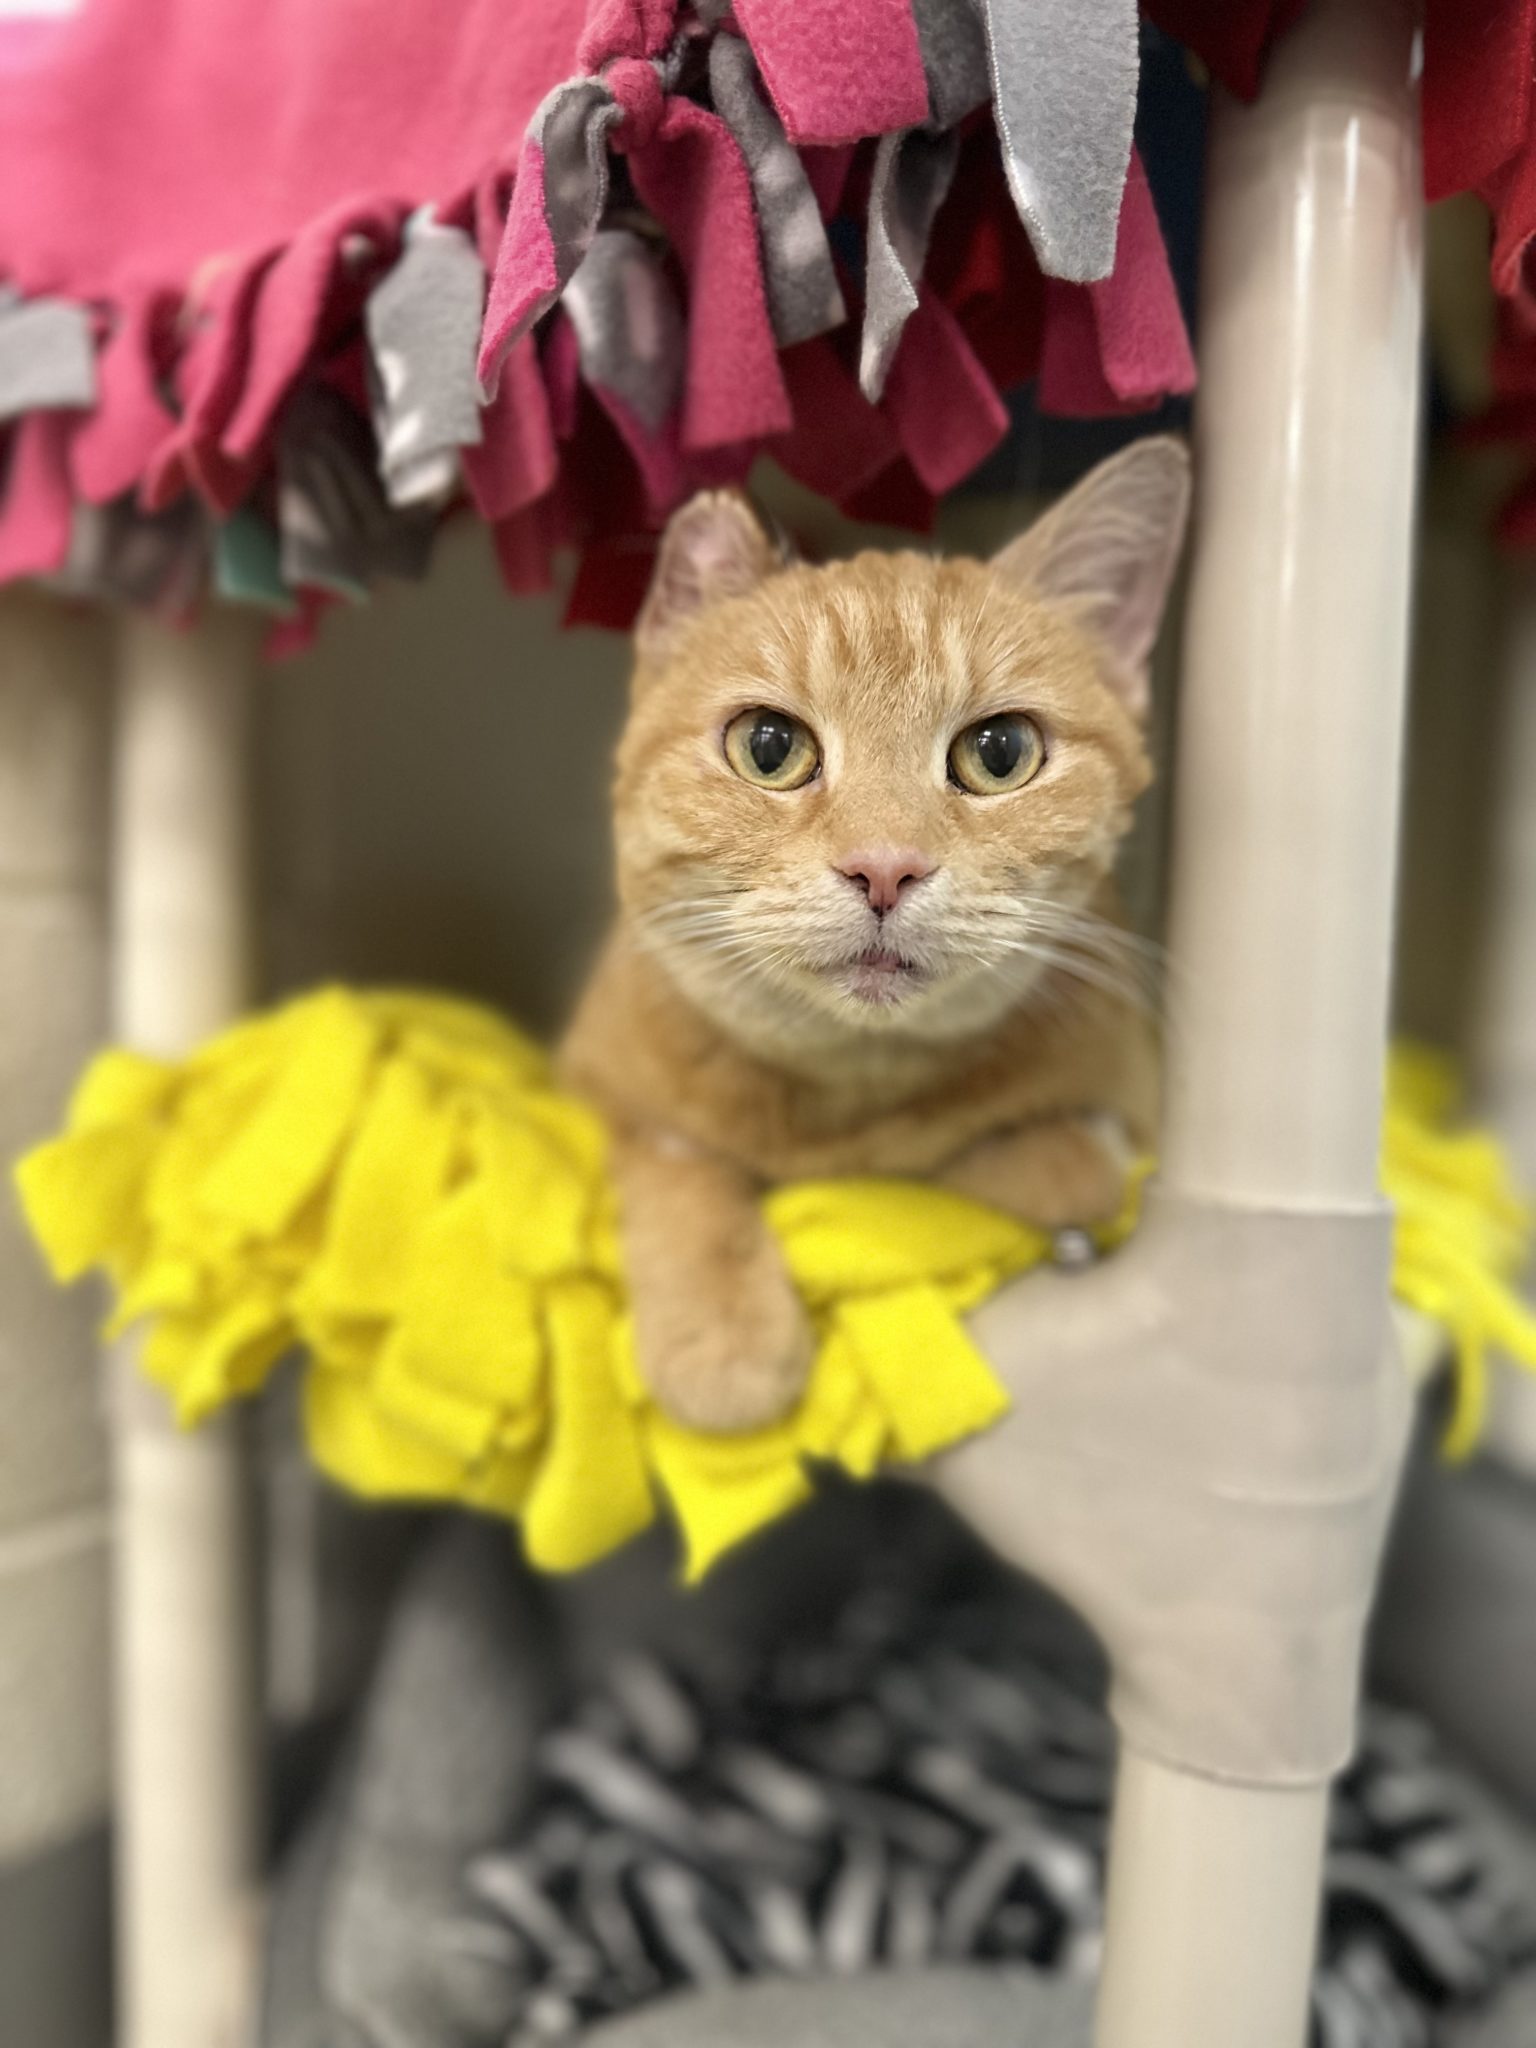 Orange tabby cat on yellow blanket looking right at camera.